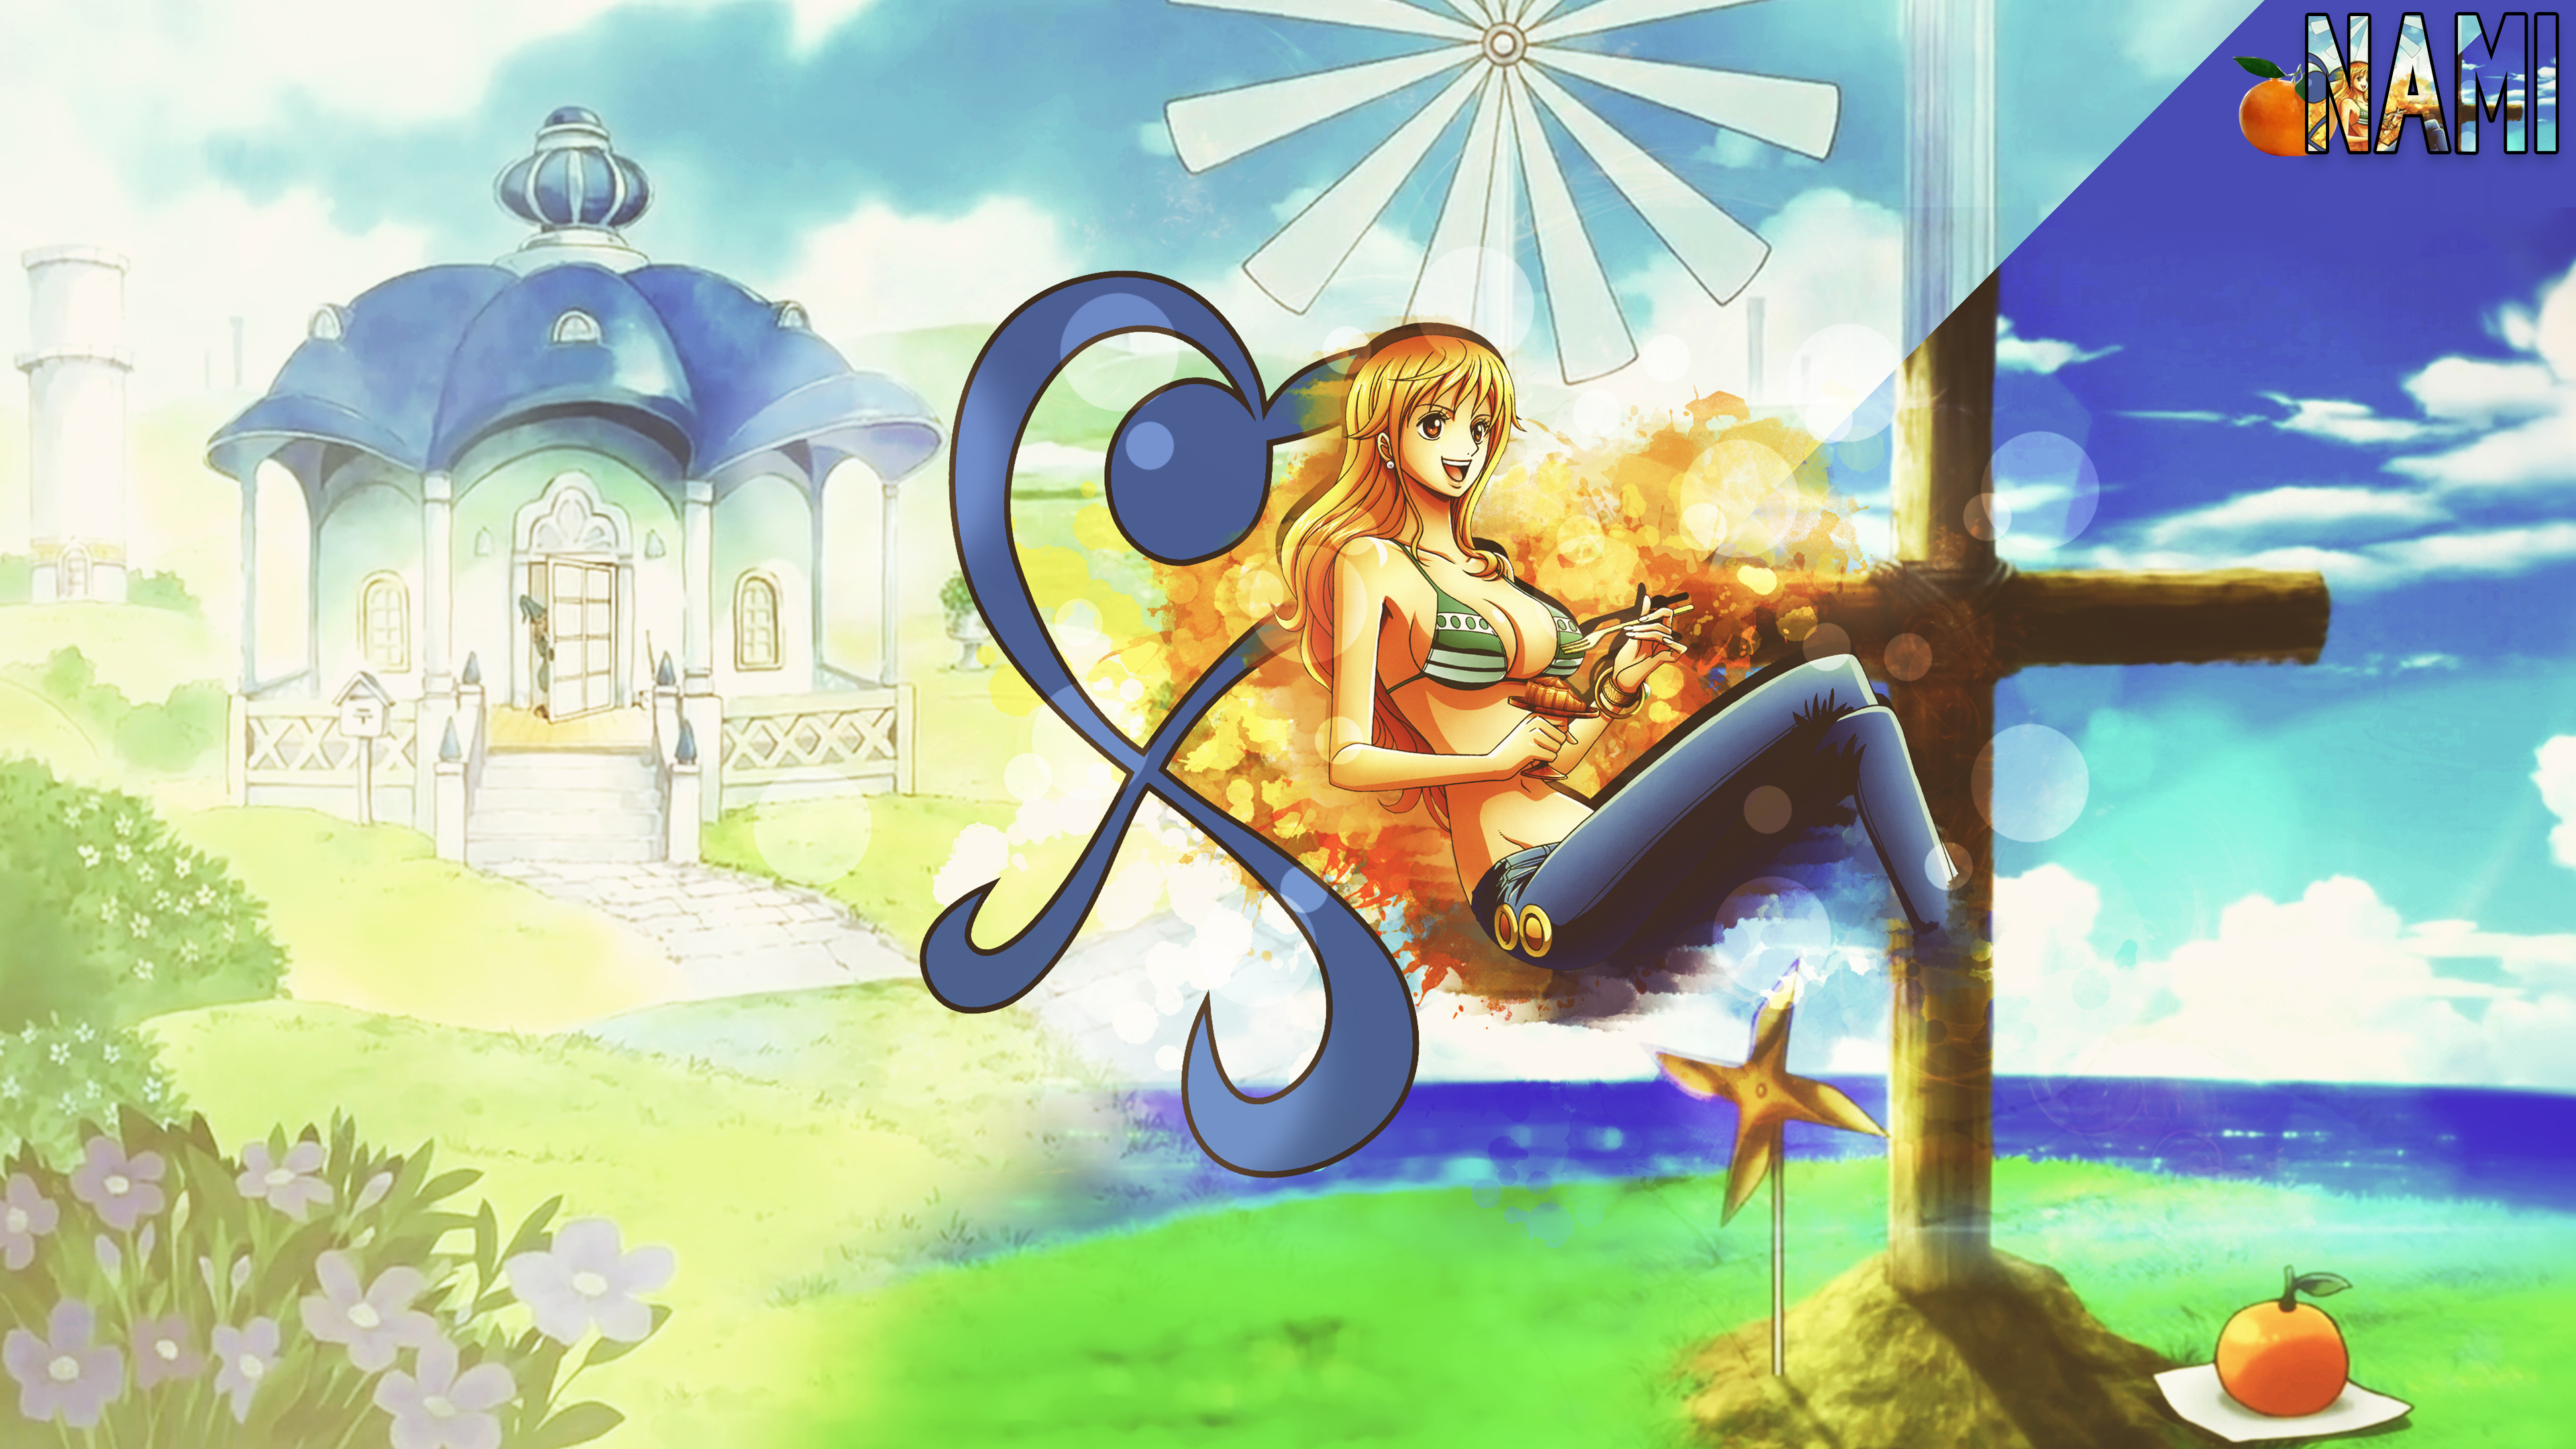 3840x2160 260+ Nami (One Piece) HD Wallpapers and Backgrounds